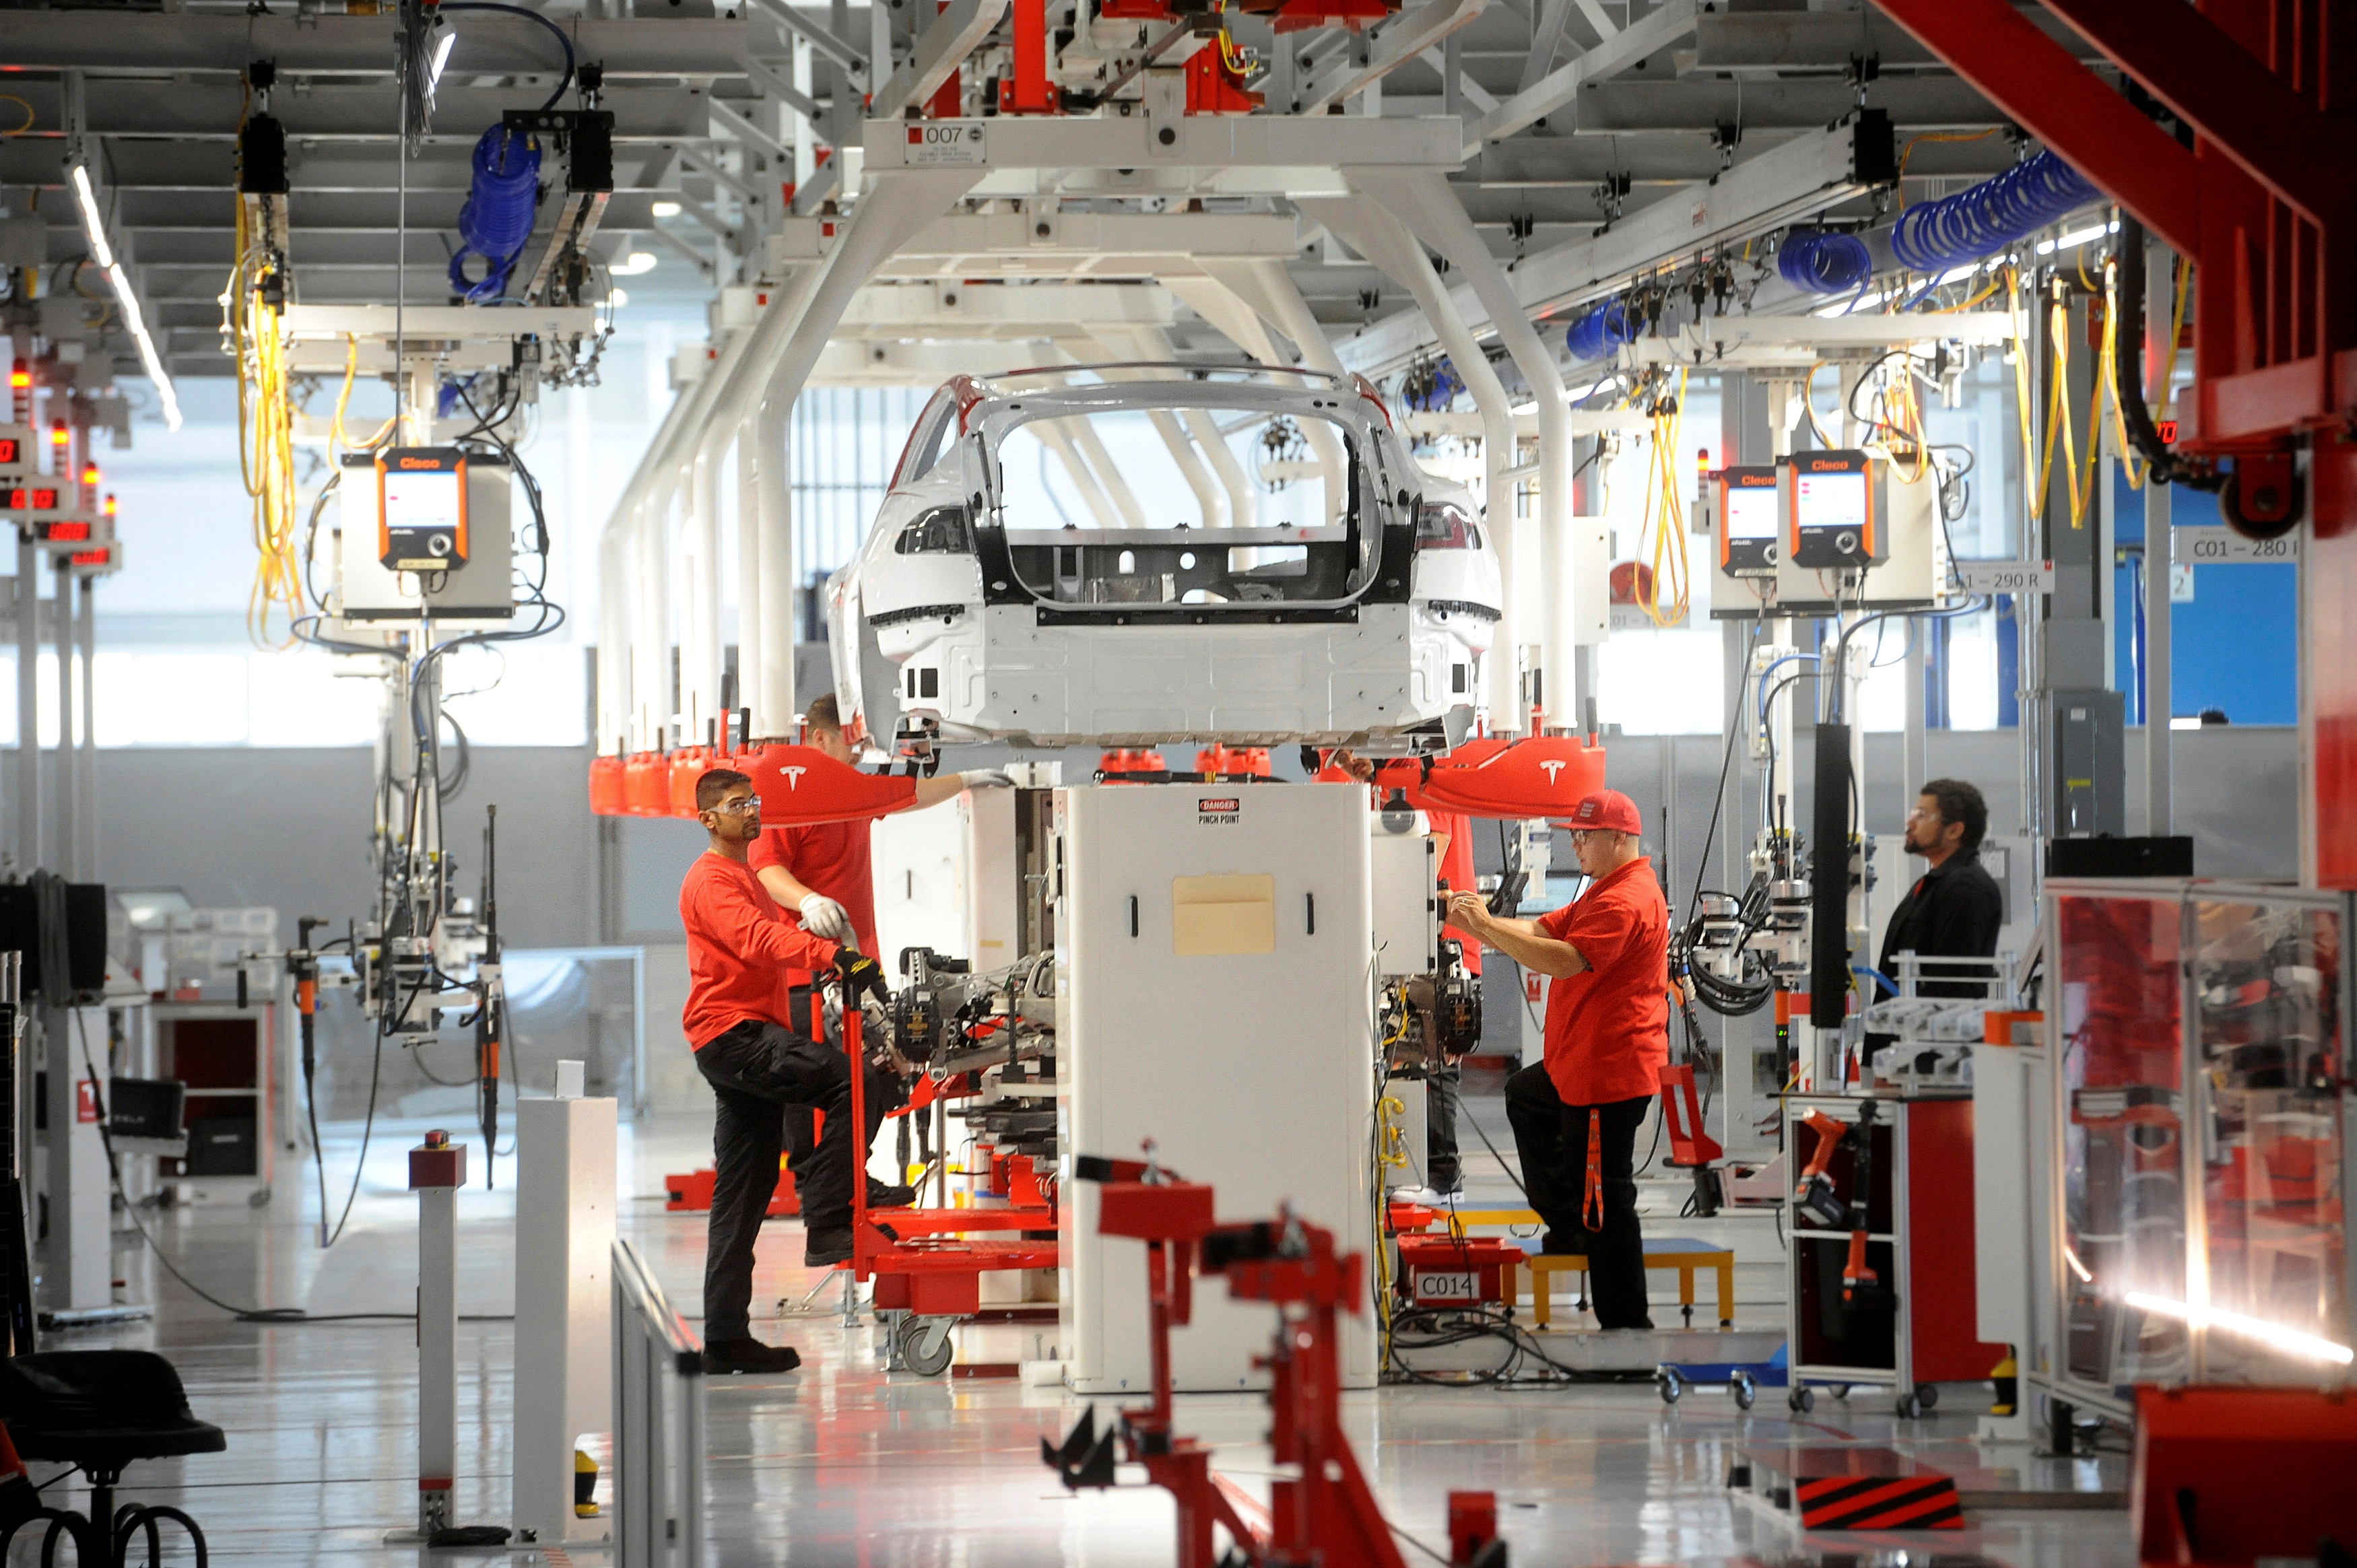 Tesla workers examine a Model S used for training and tool calibration at the company's factory in Fremont